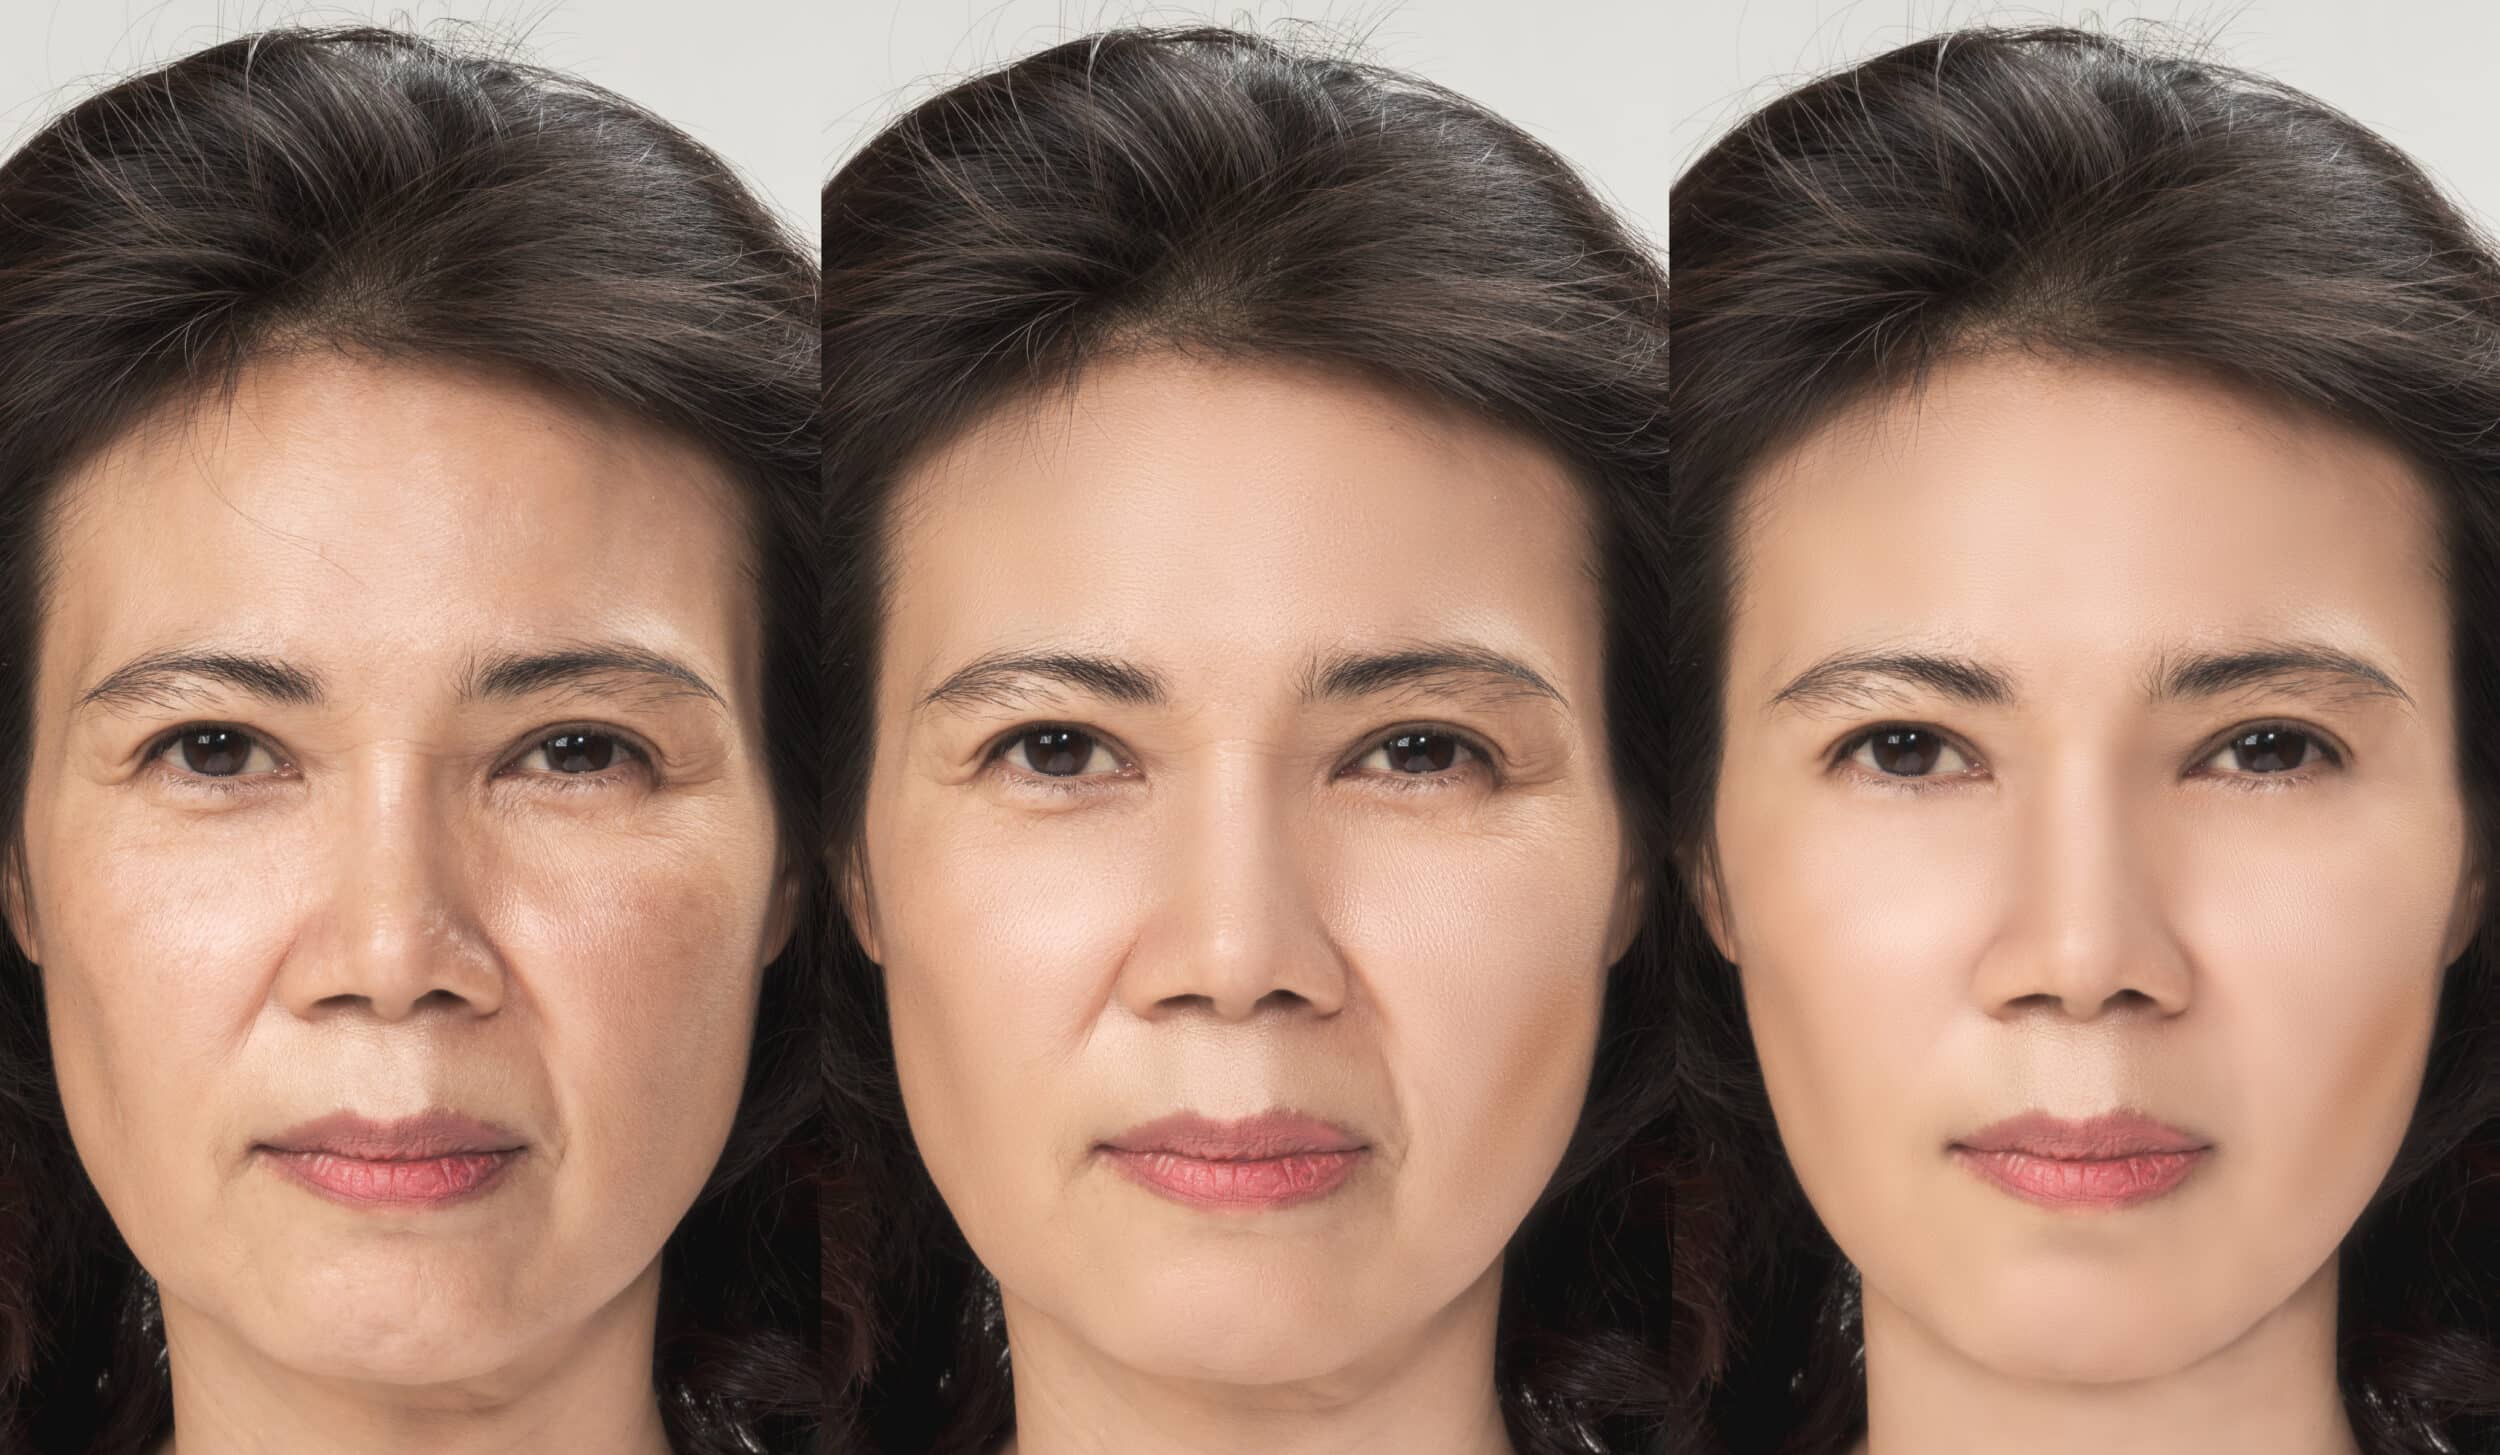 Anti Aging process, Asian woman face skin with anti aging procedures, rejuvenation, lifting, tightening of facial skin, restoration of youthful skin anti wrinkle. Old and young concept.